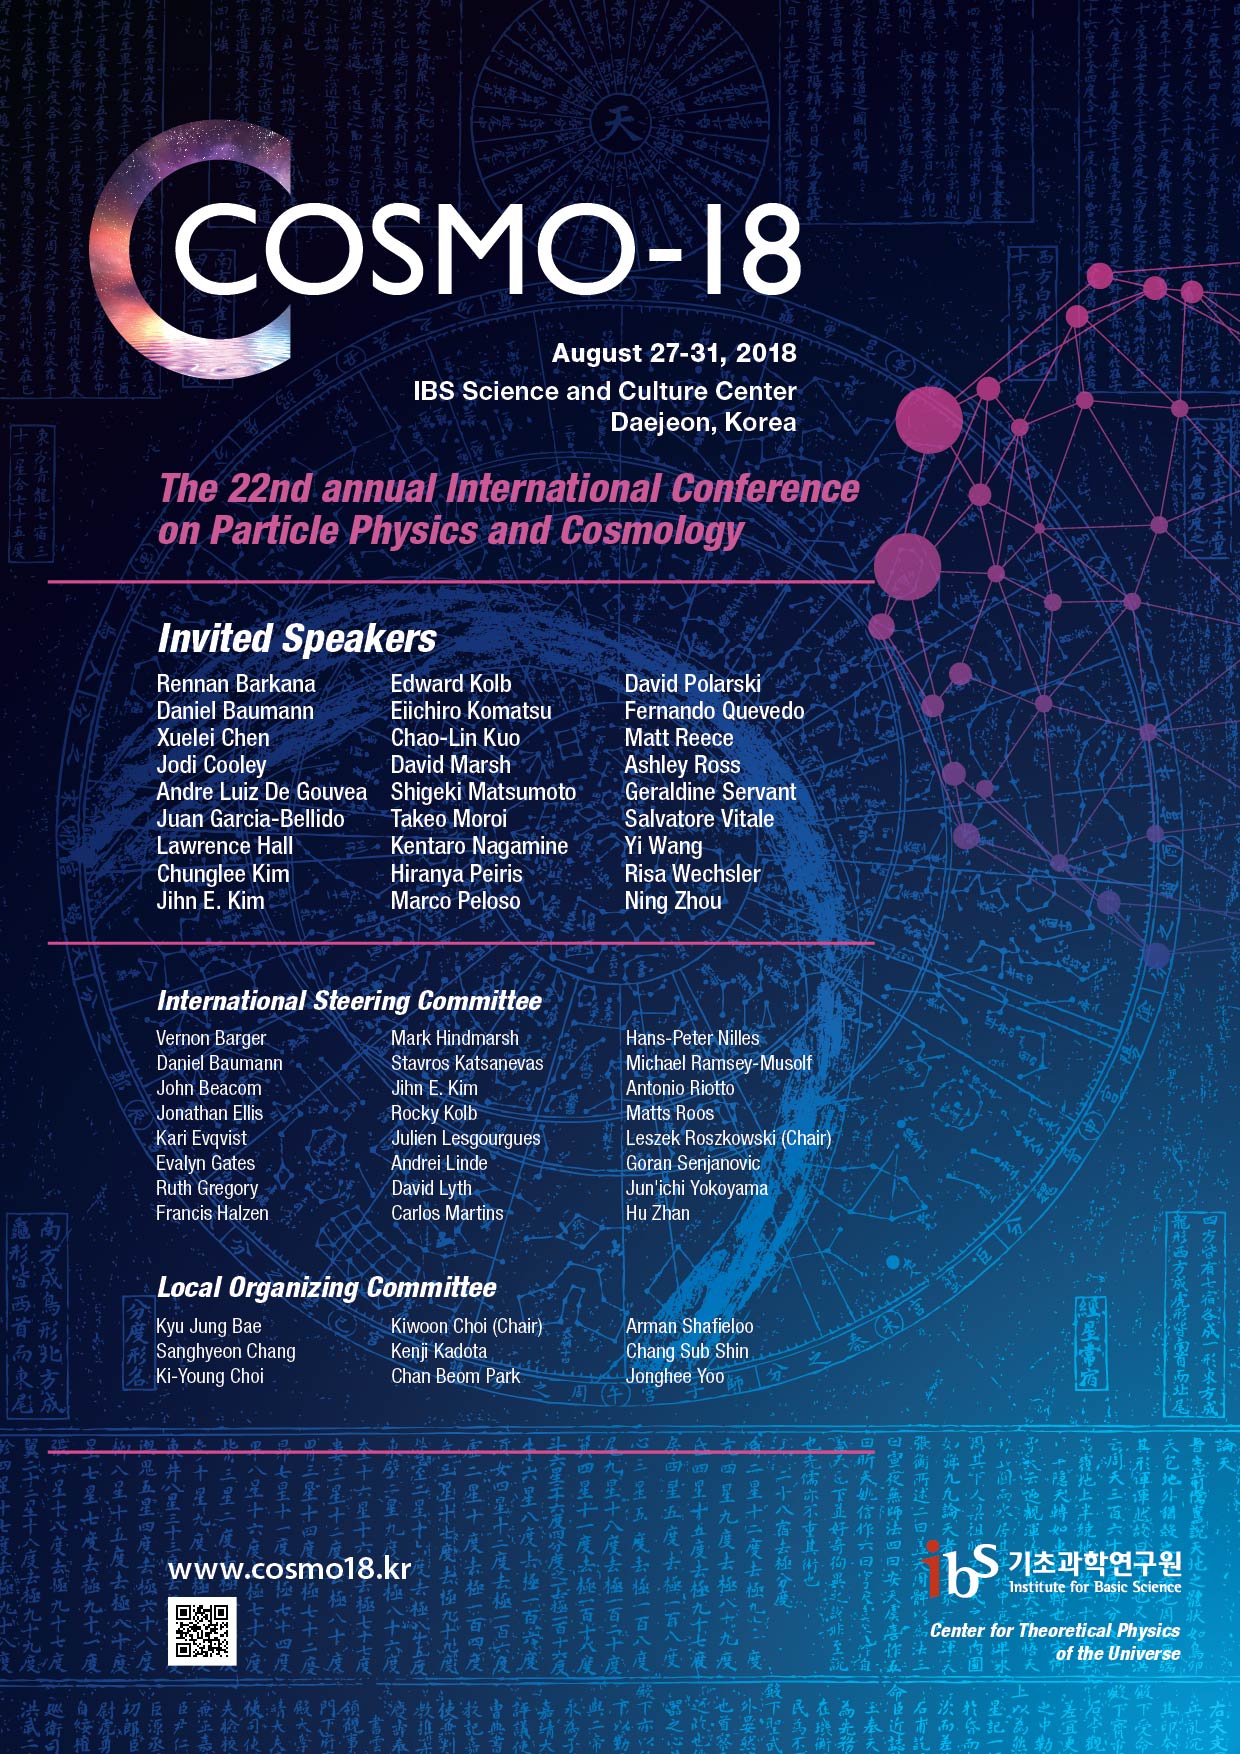 The 22nd annual International Conference on Particle Physics and Cosmology 사진